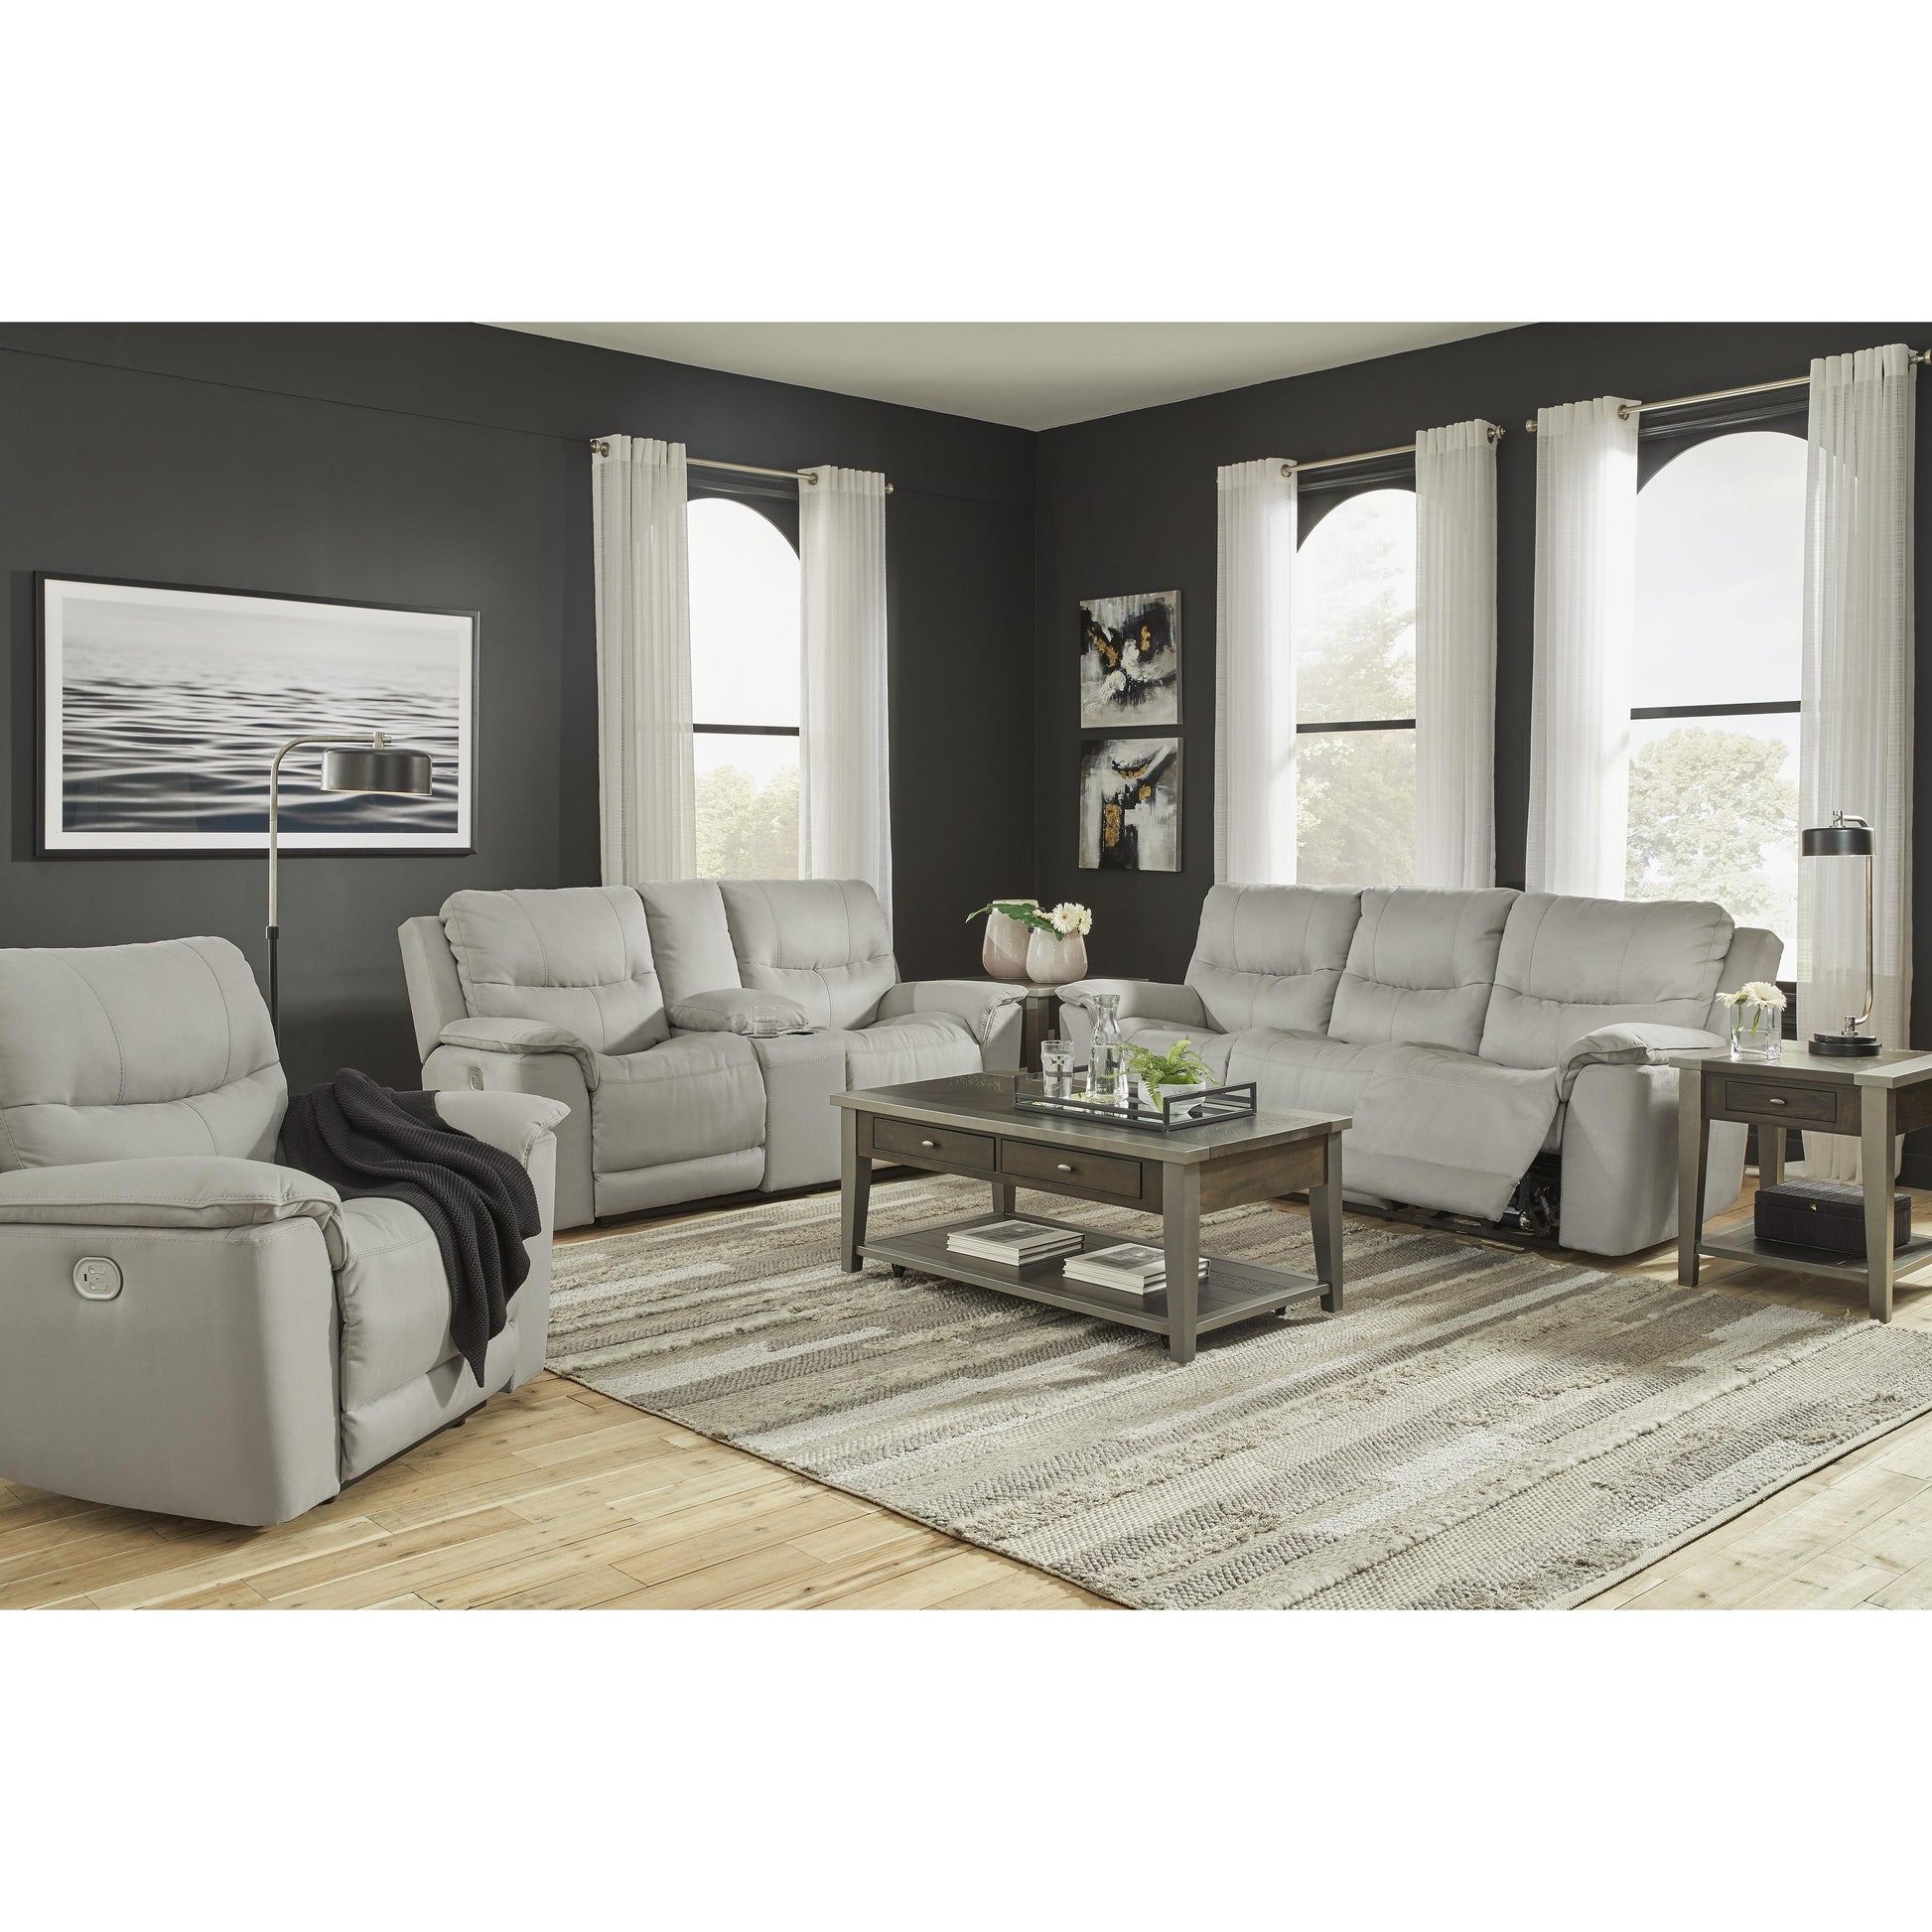 Signature Design by Ashley Next-Gen Gaucho Power Reclining Leather Look Sofa 6080615 IMAGE 13